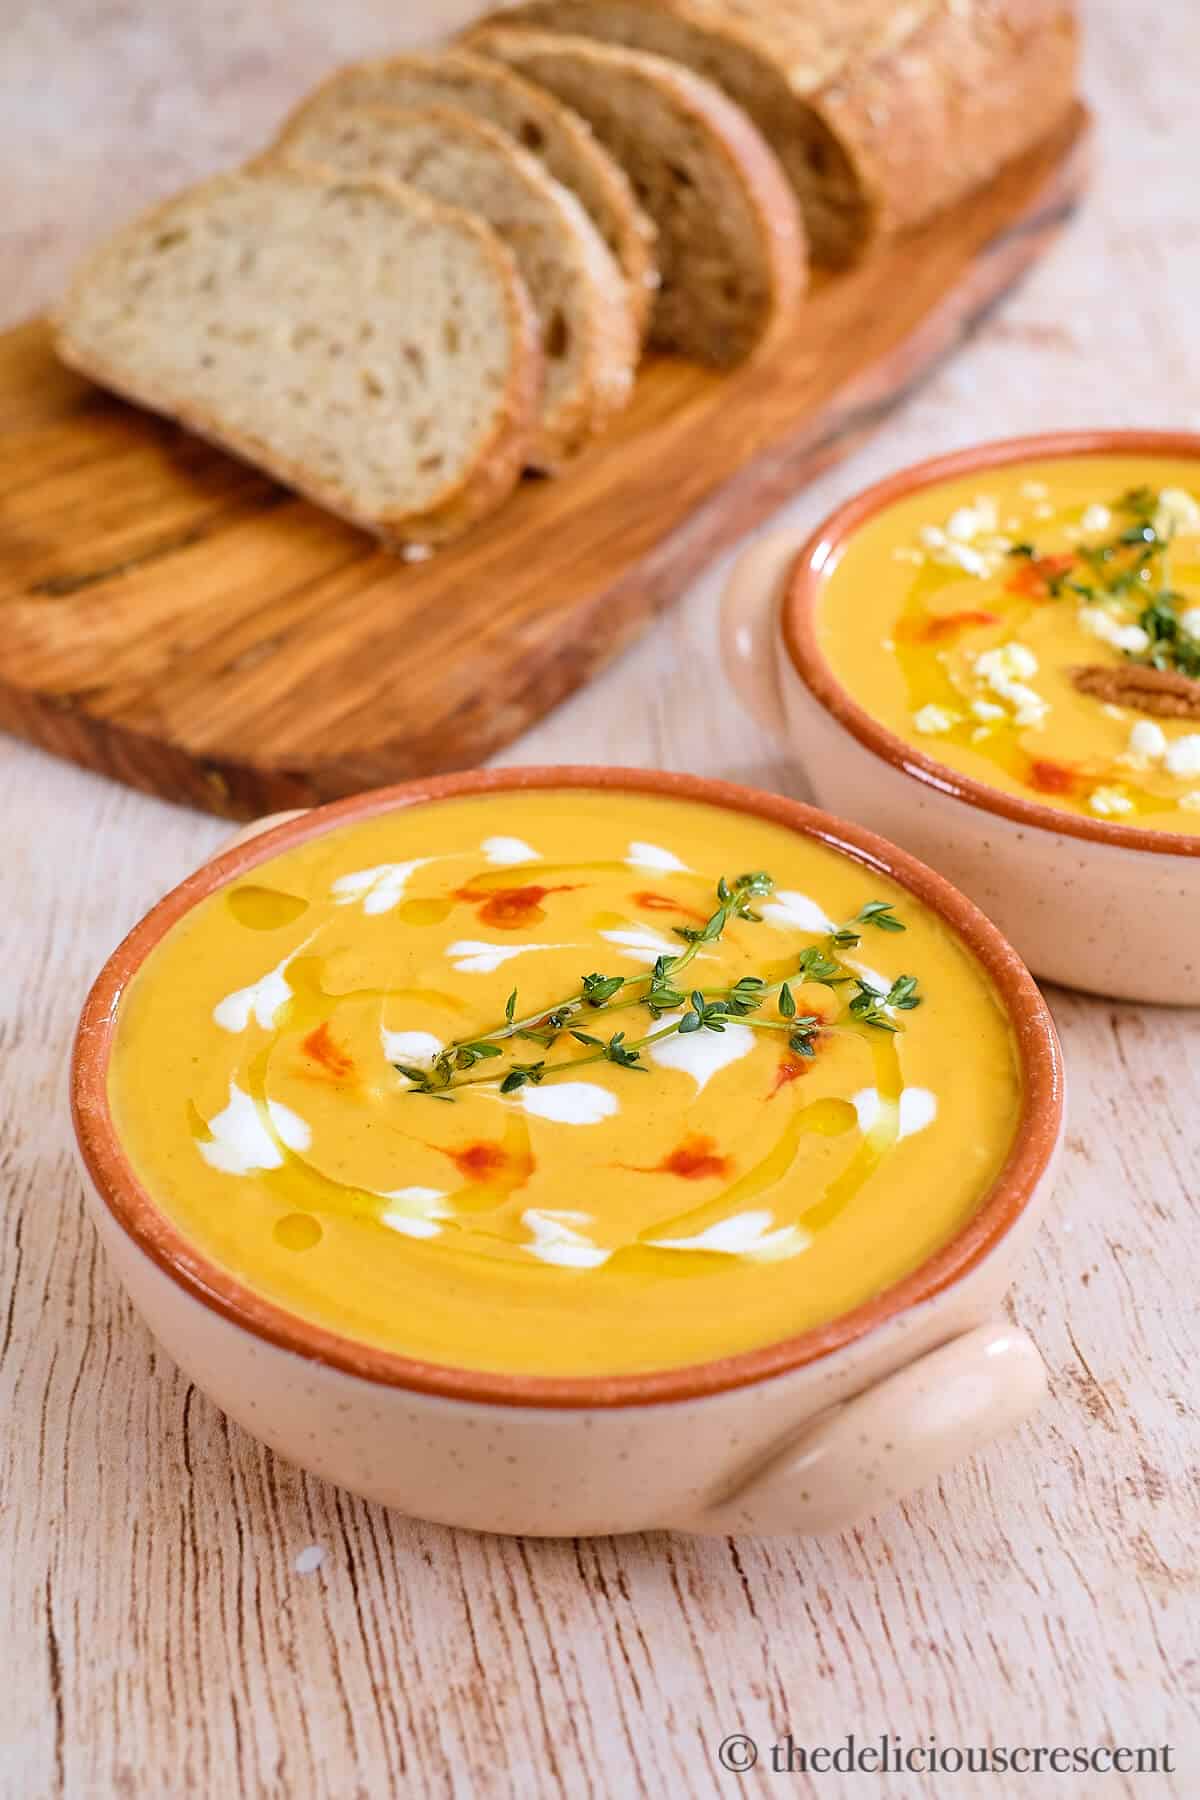 Two bowls of soup served with bread.